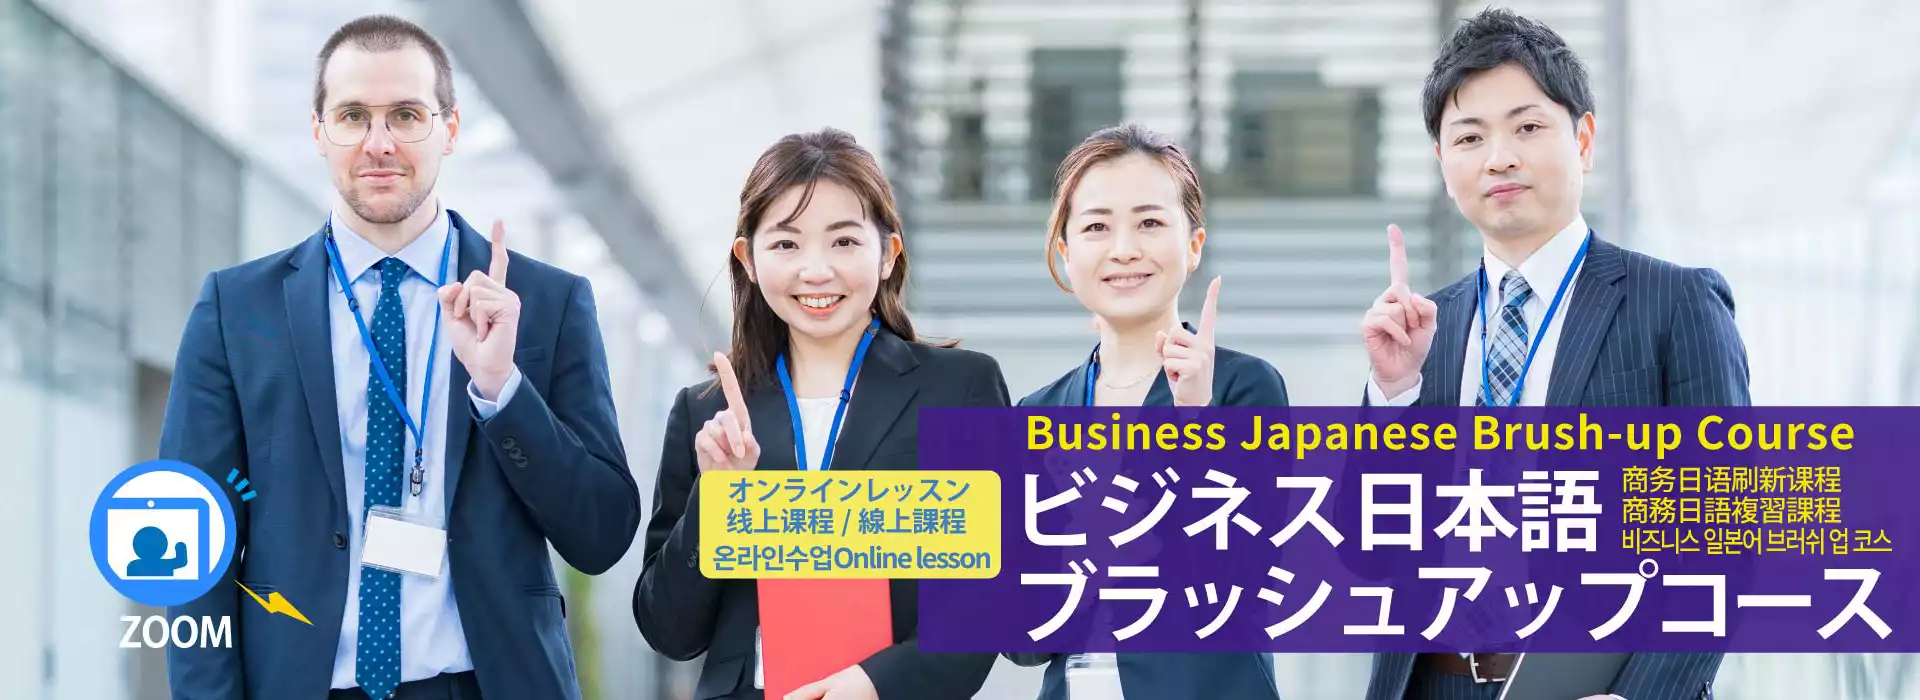 Business Japanese Brush-up Course